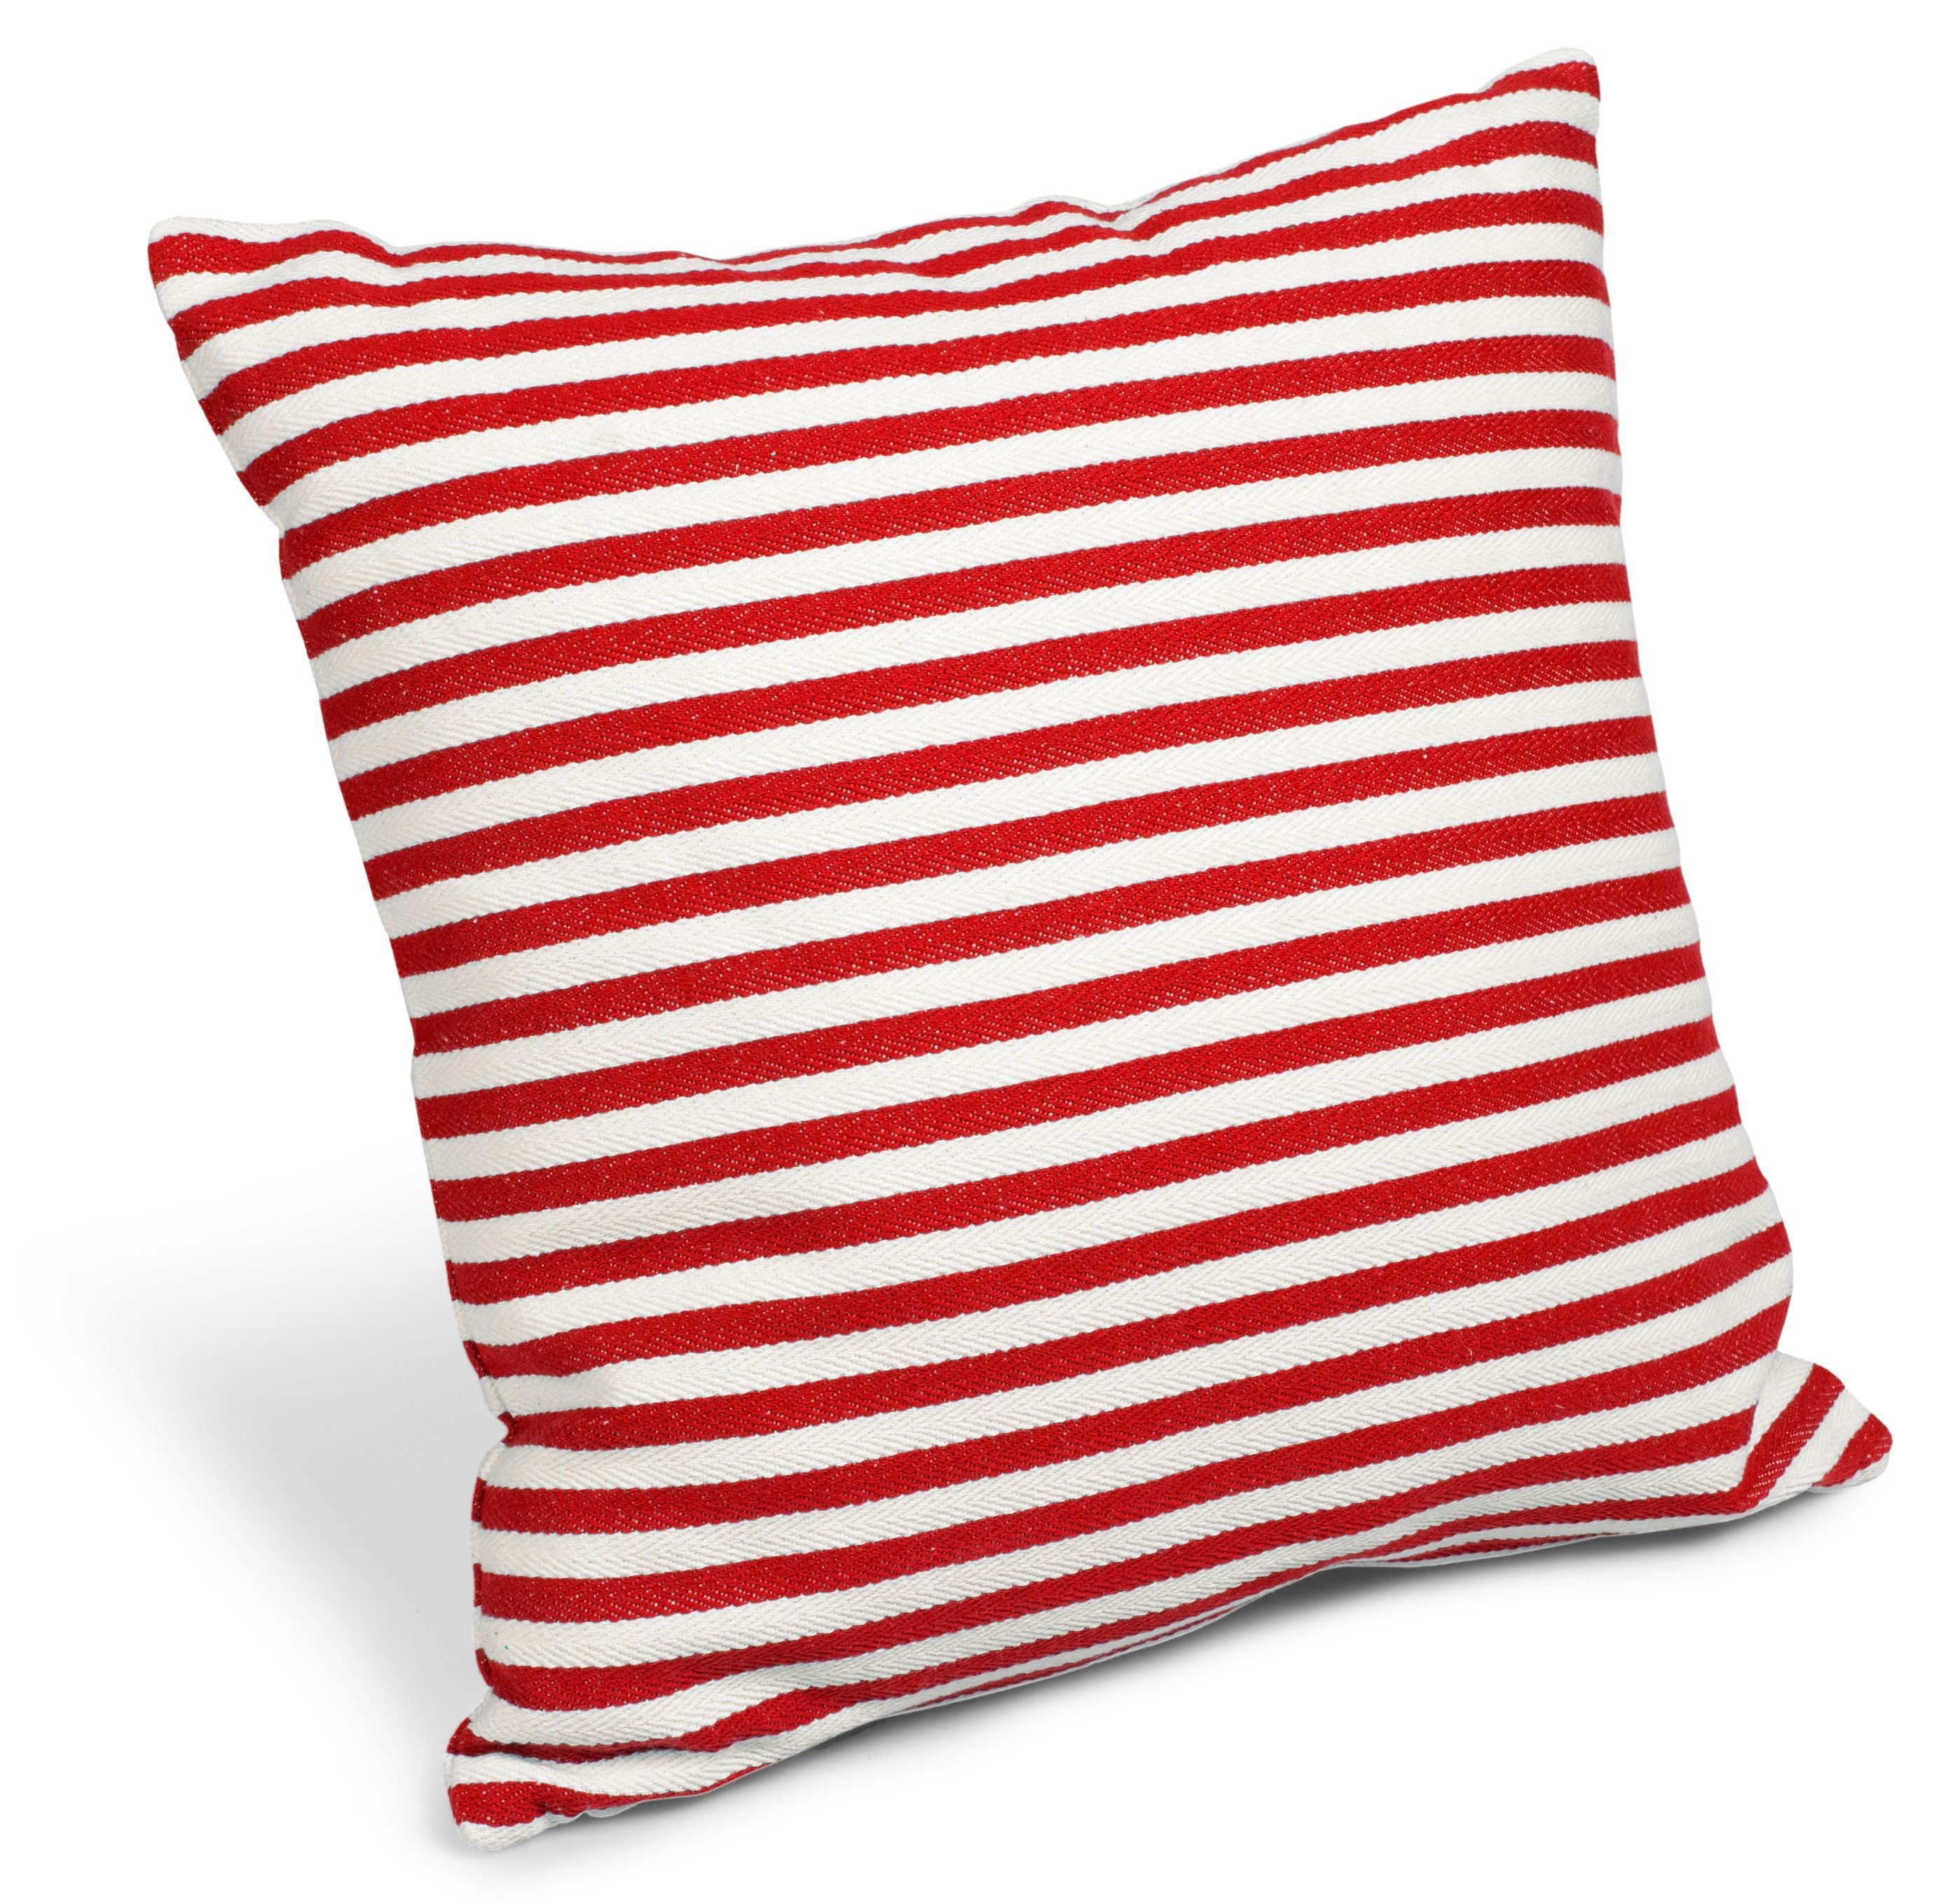 St Ives Striped Red Cushion | Departments | DIY at B&Q